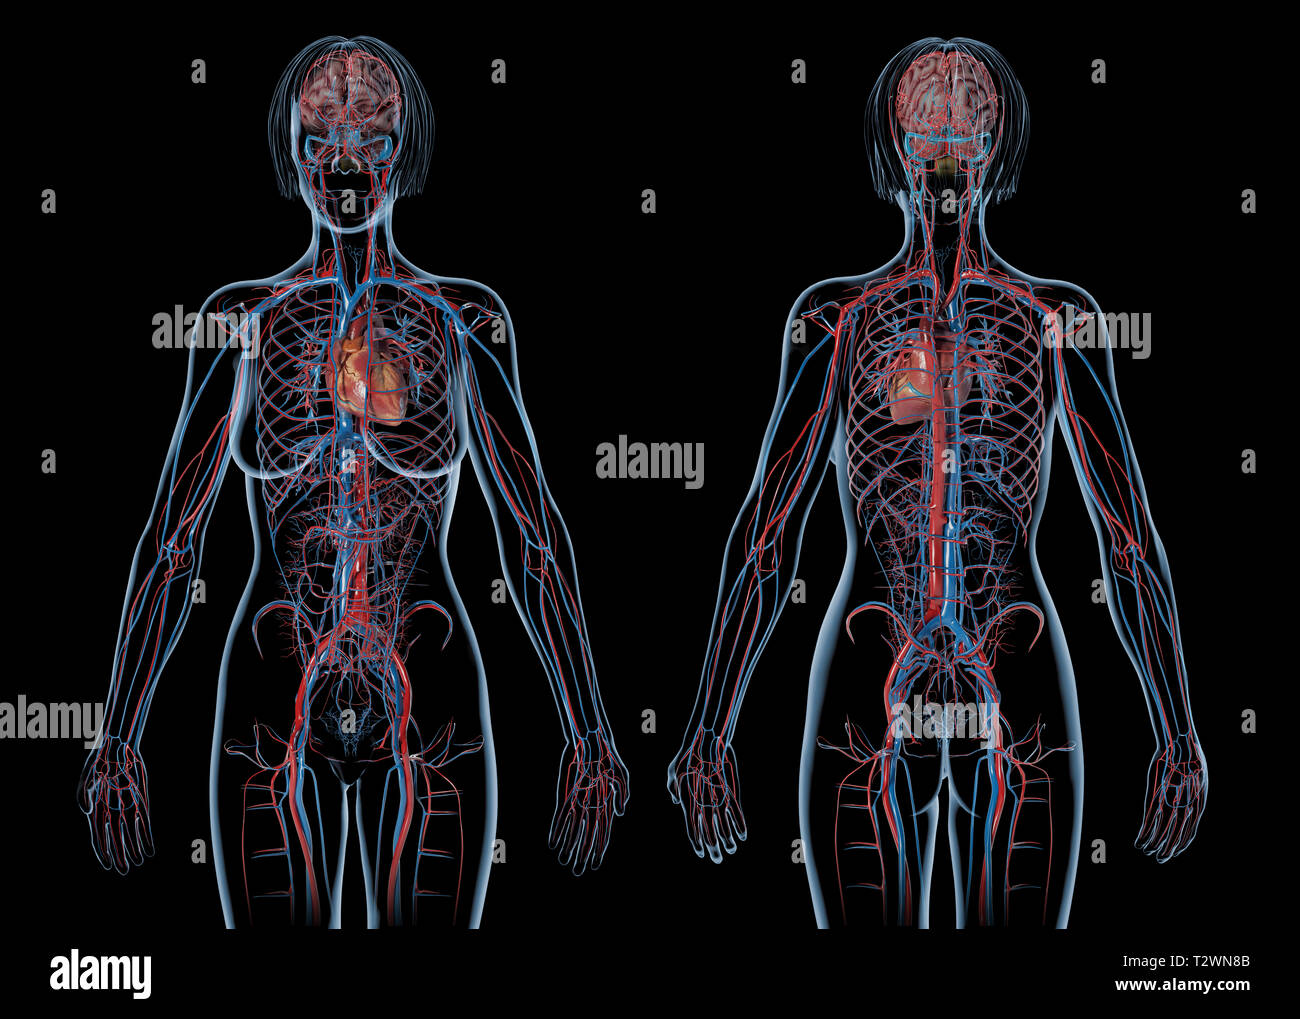 Woman cardiovascular system, rear and front views. On black background. Stock Photo